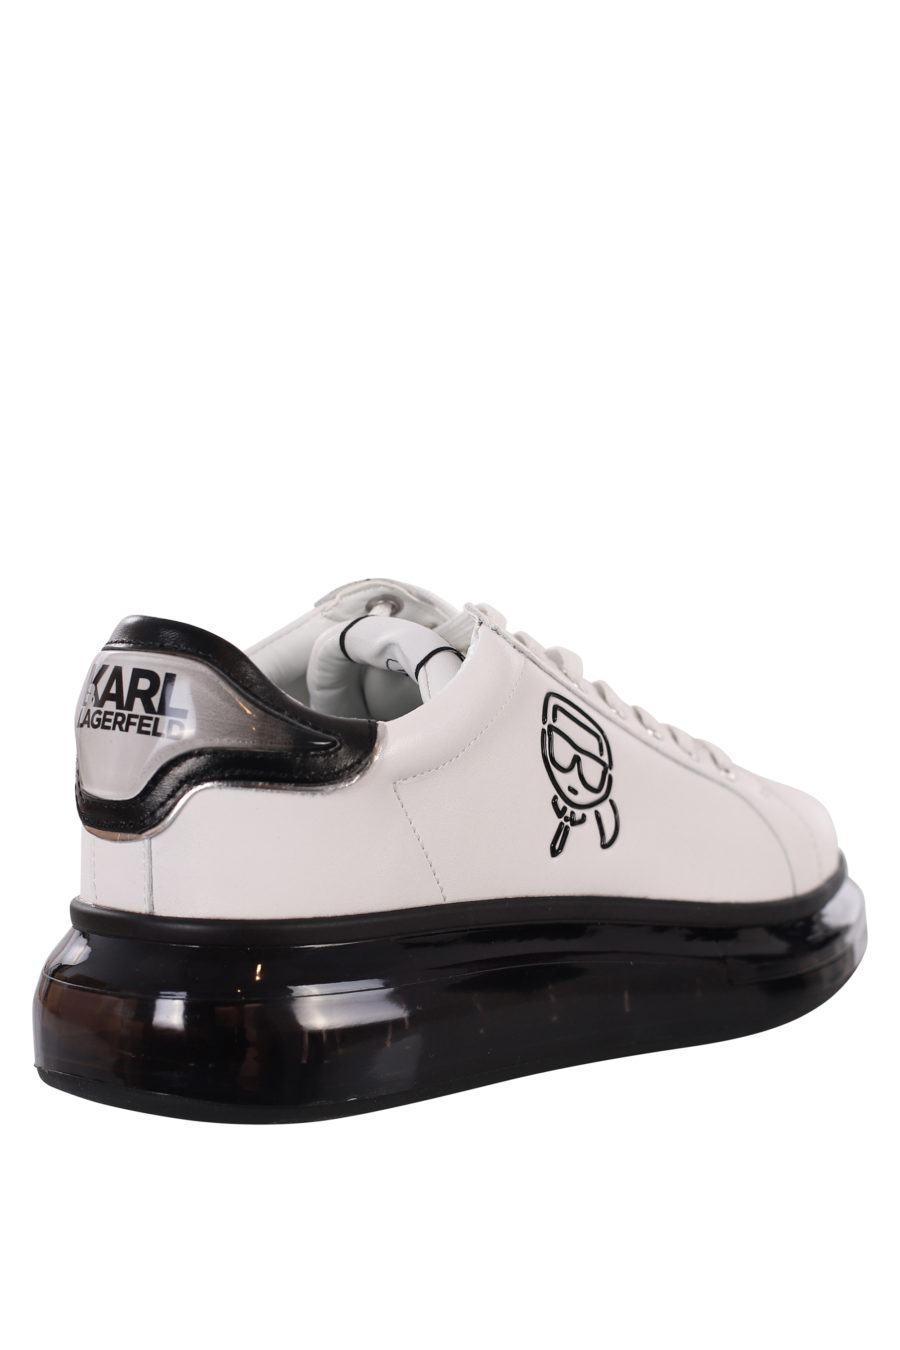 White trainers with black silhouette logo and black sole - IMG 0420